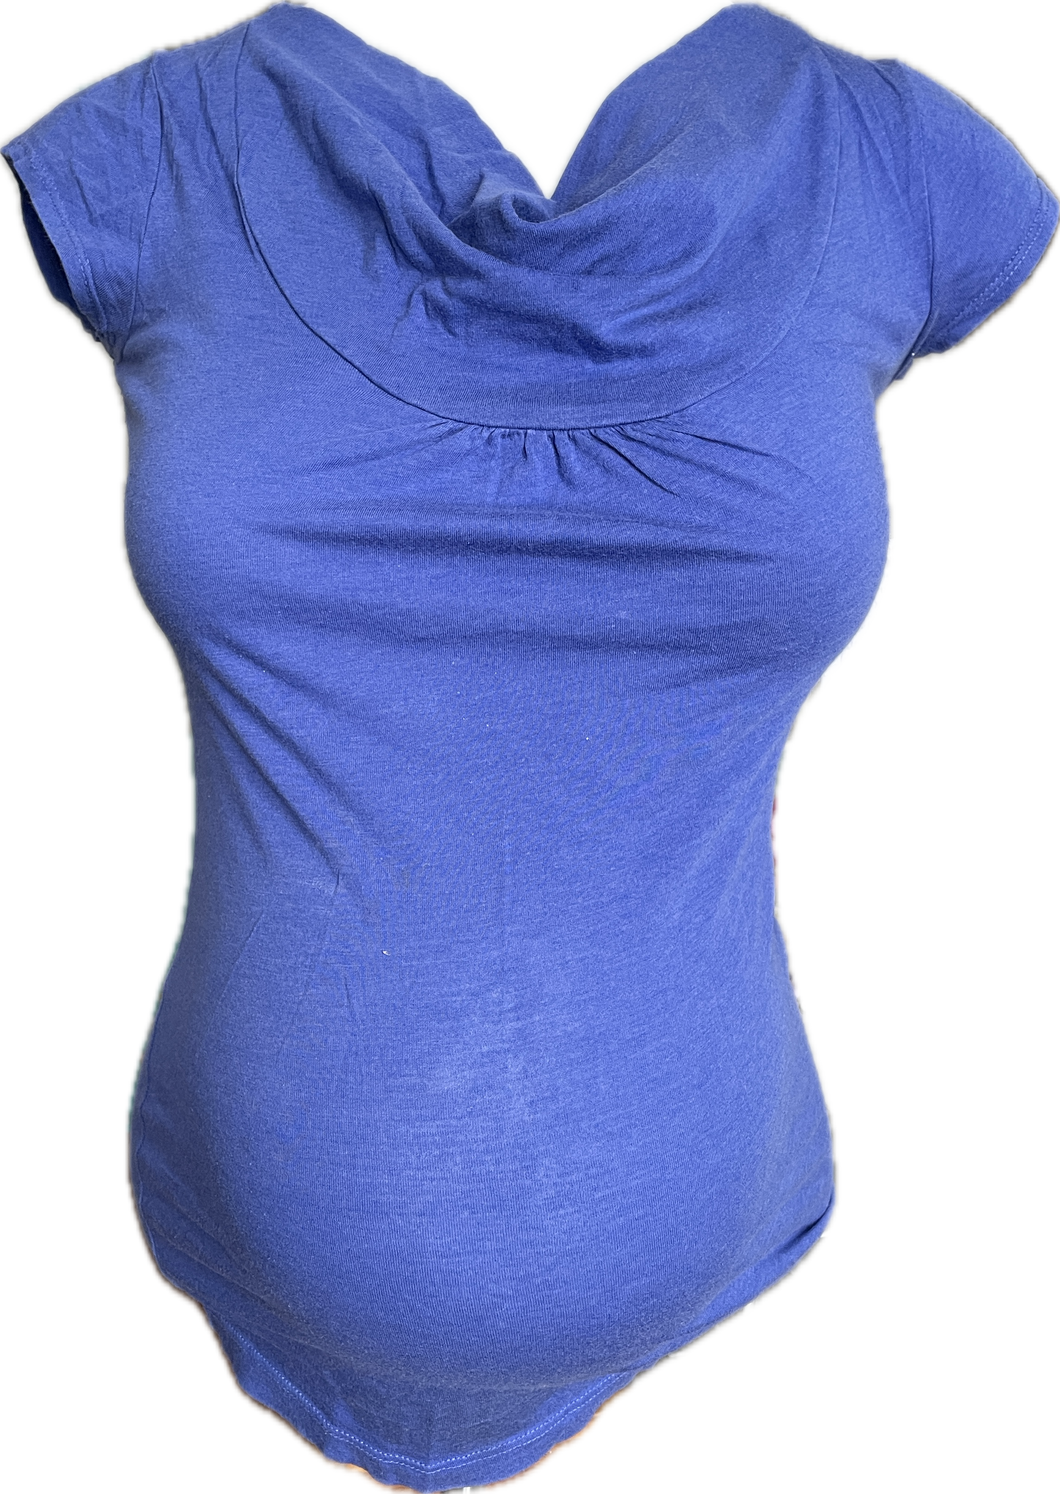 XS Thyme Maternity Cap Sleeve Top in Blue